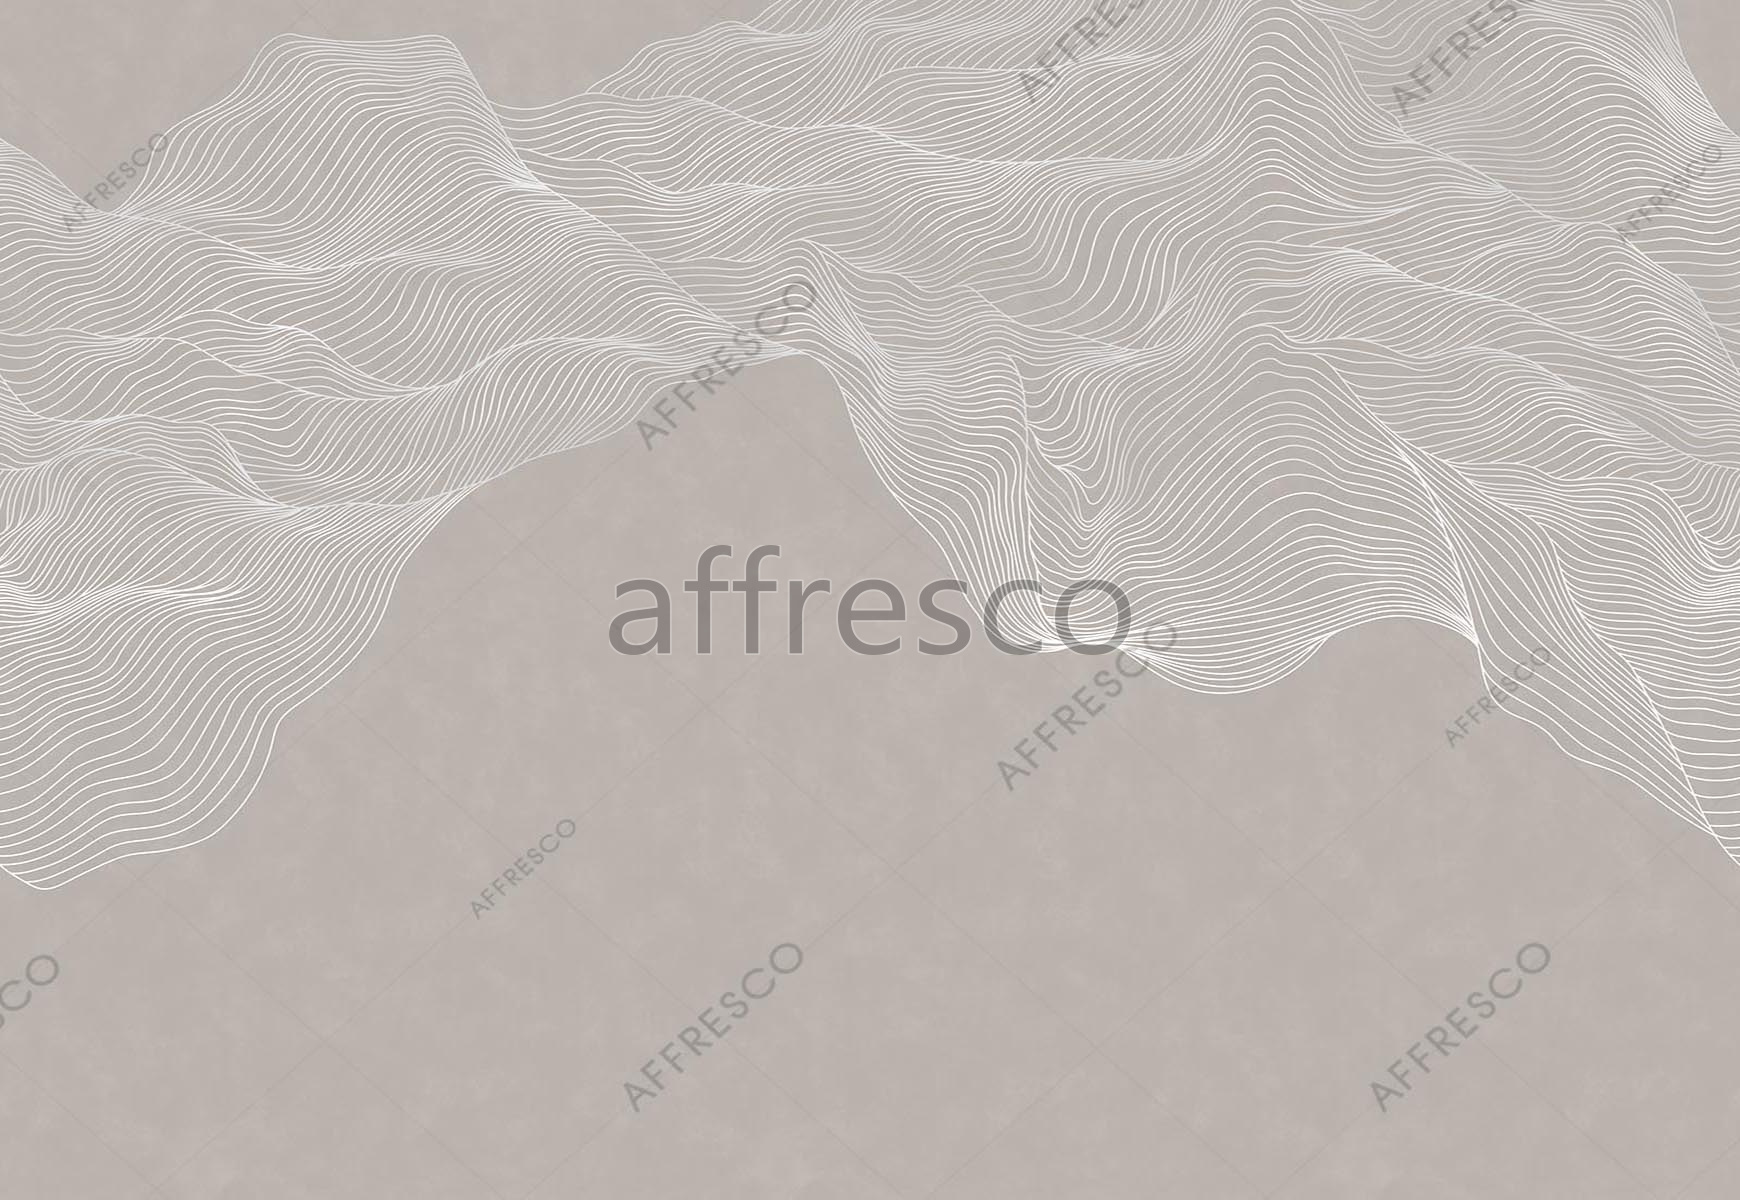 ID139148 | Textures | Incredible clouds | Affresco Factory